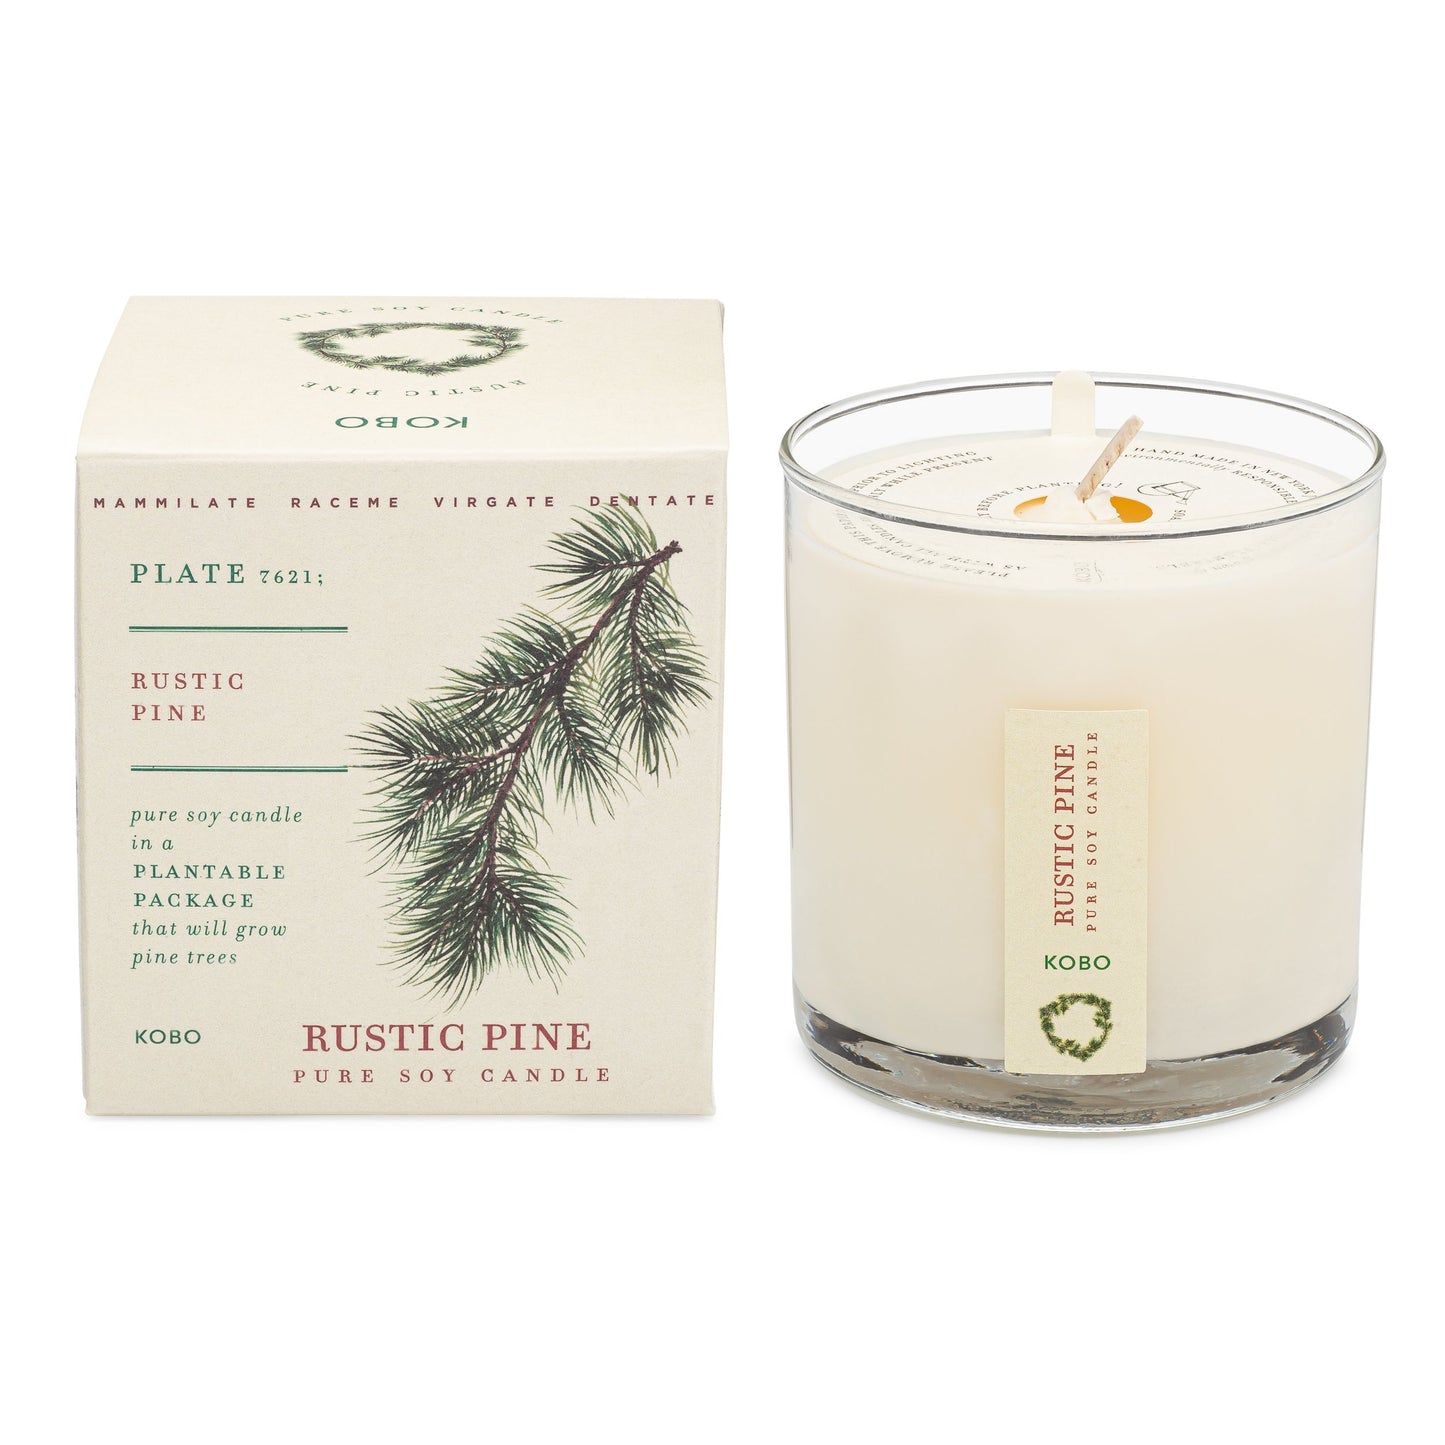 Rustic Pine Plant The Box 9 oz Candle